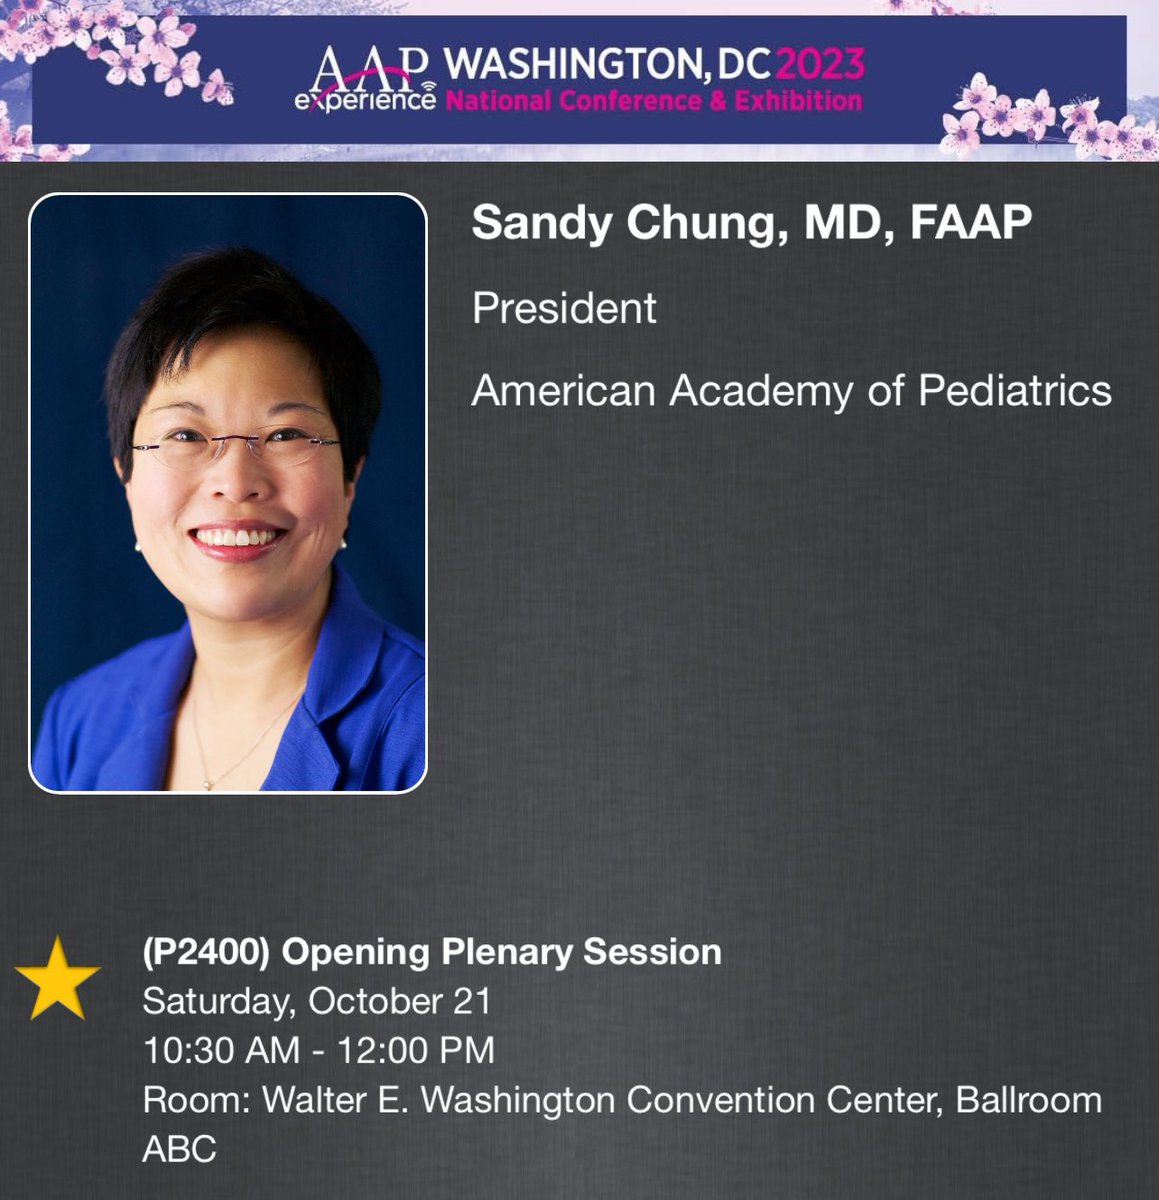 “Children are not little adults… and pediatricians are not little internists… we are pediatricians.” - Dr. Sandy Chung, President of the @AmerAcadPeds